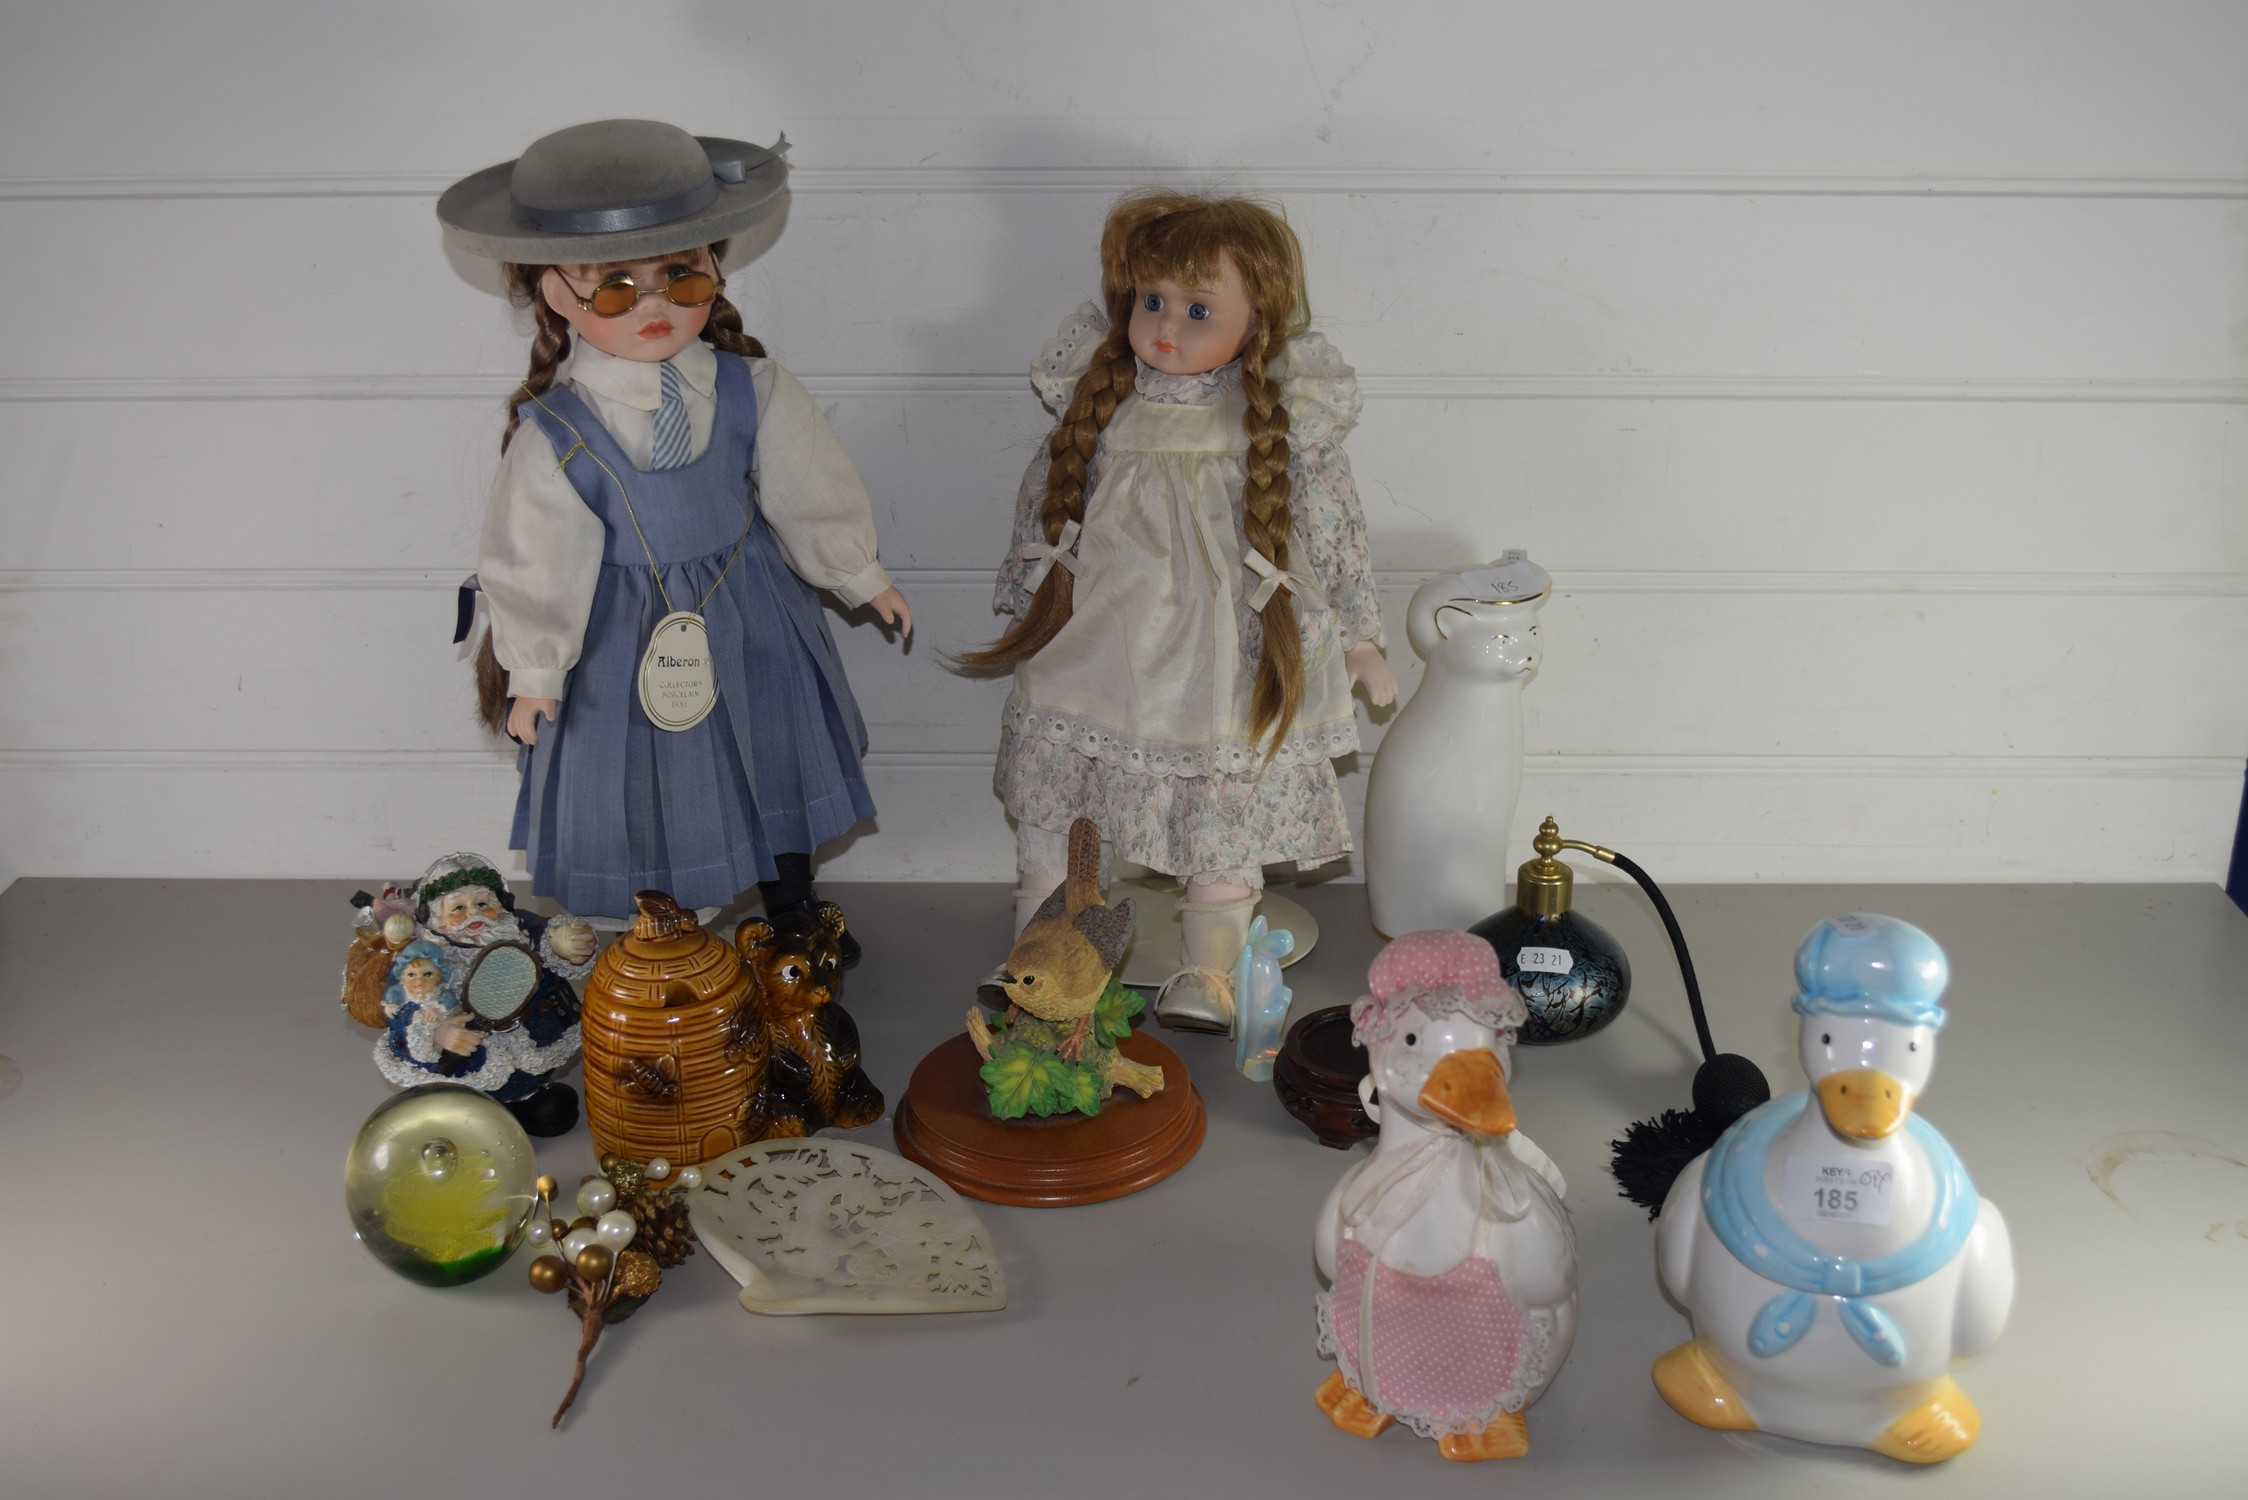 DOLLS AND POTTERY MODELS OF DUCKS